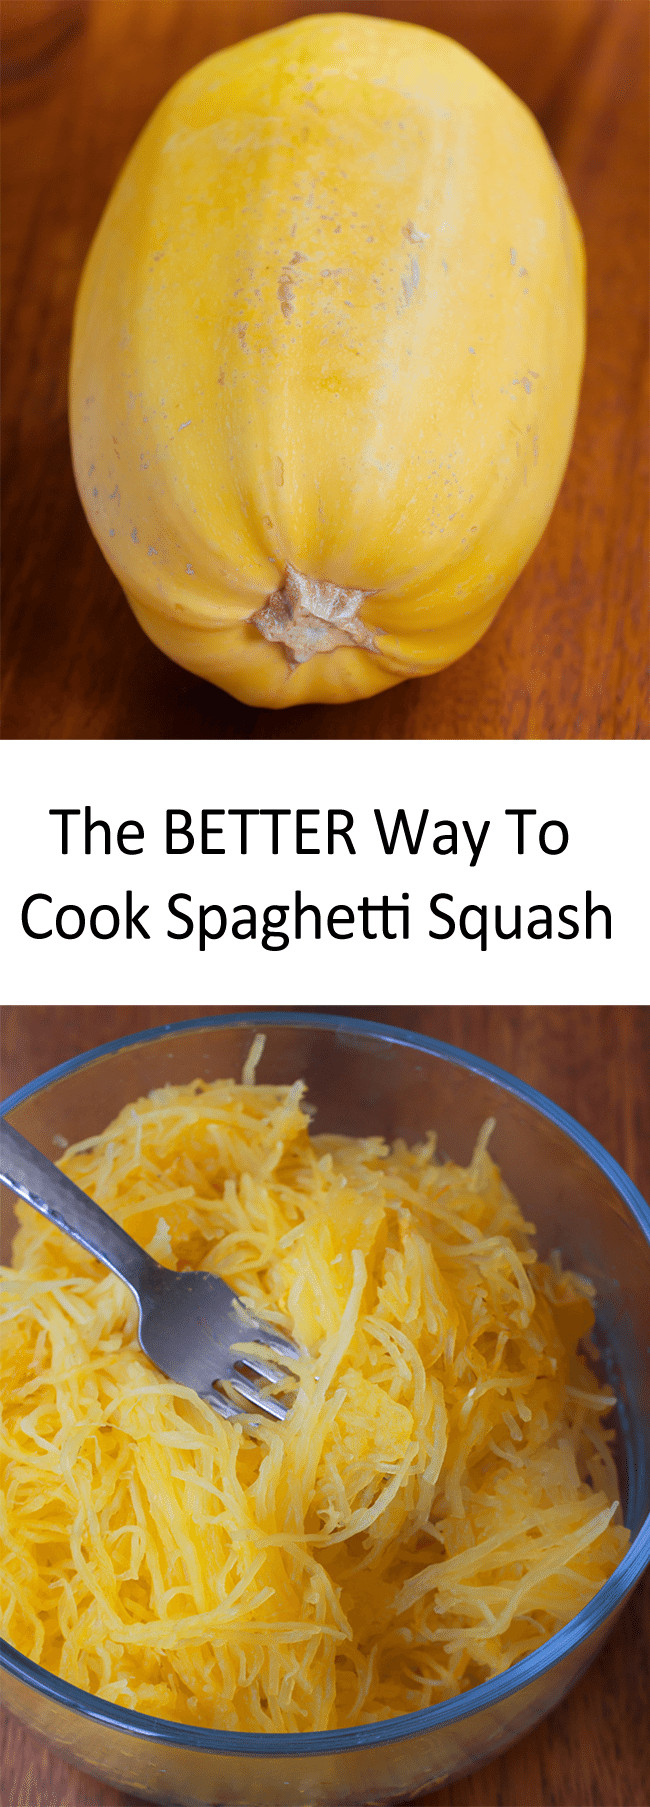 Cooking Spaghetti Squash In The Microwave
 How To Cook Spaghetti Squash